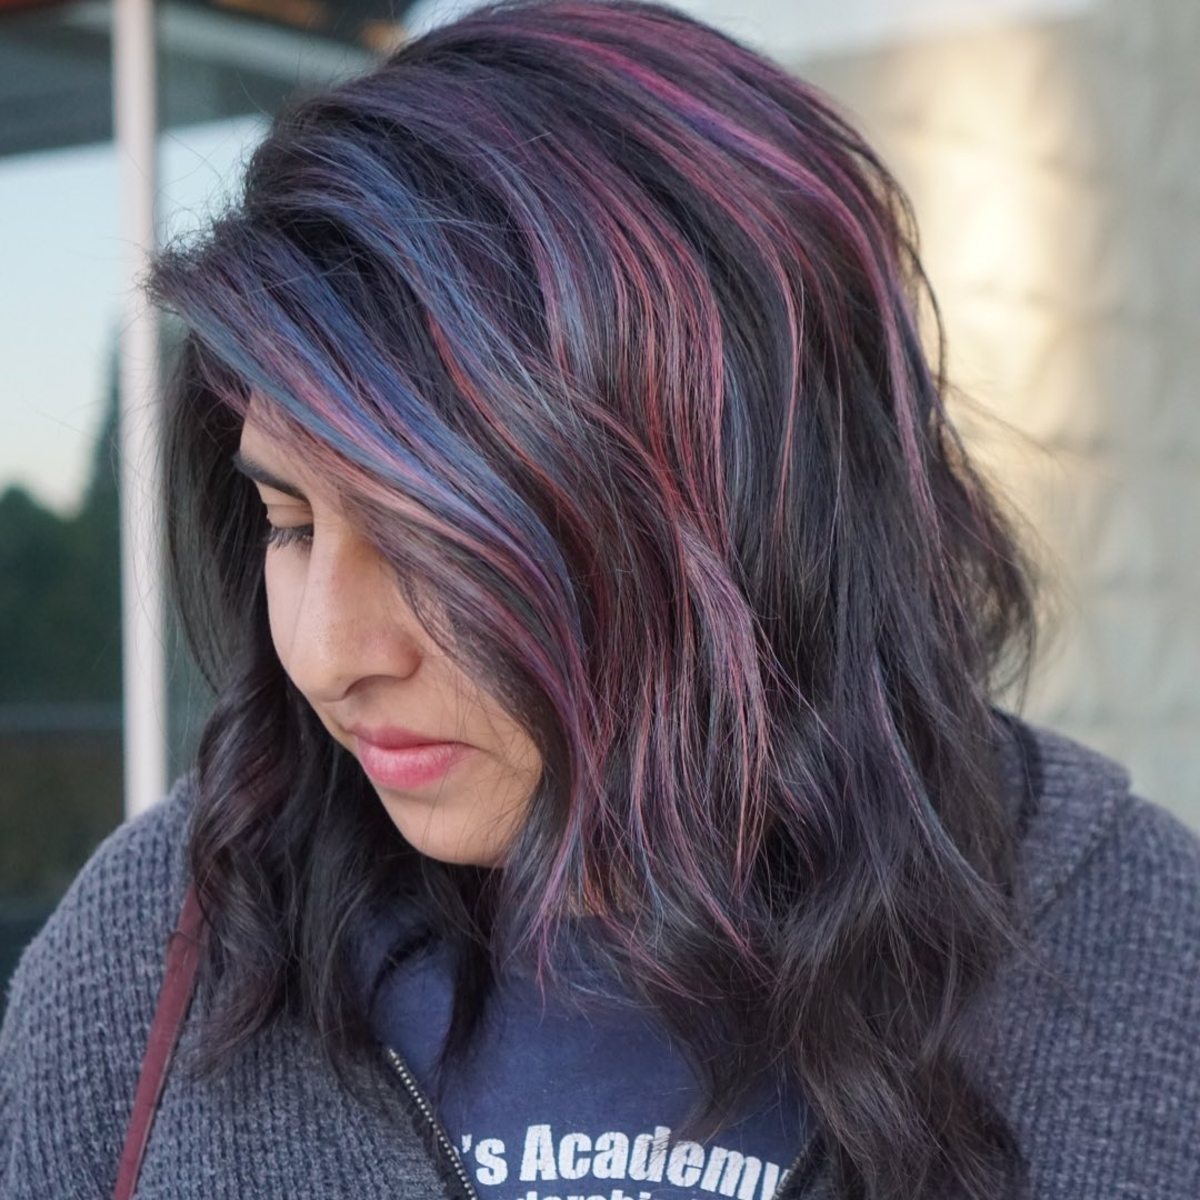 Mix of Red and Blue Accents on Medium-Length Mane